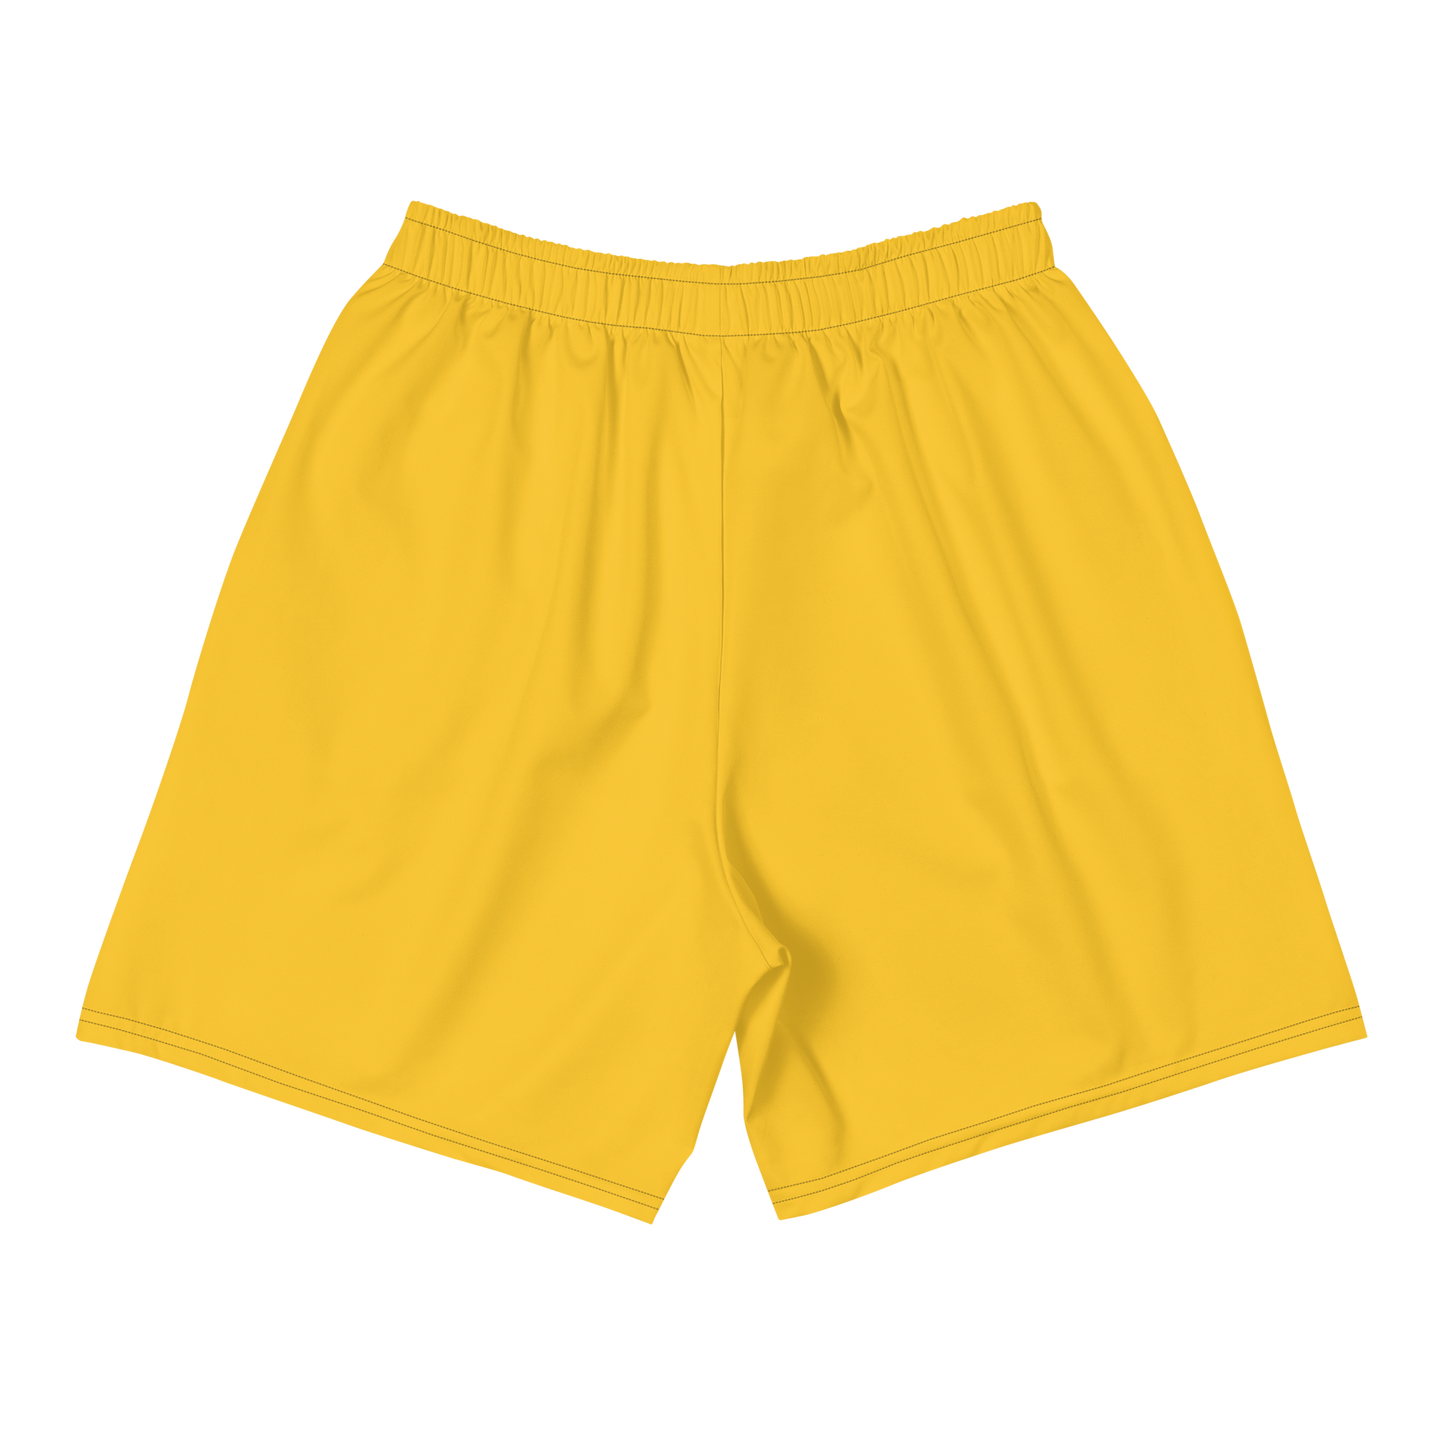 BRYCE SIMPSON ATHLETIC SHORTS